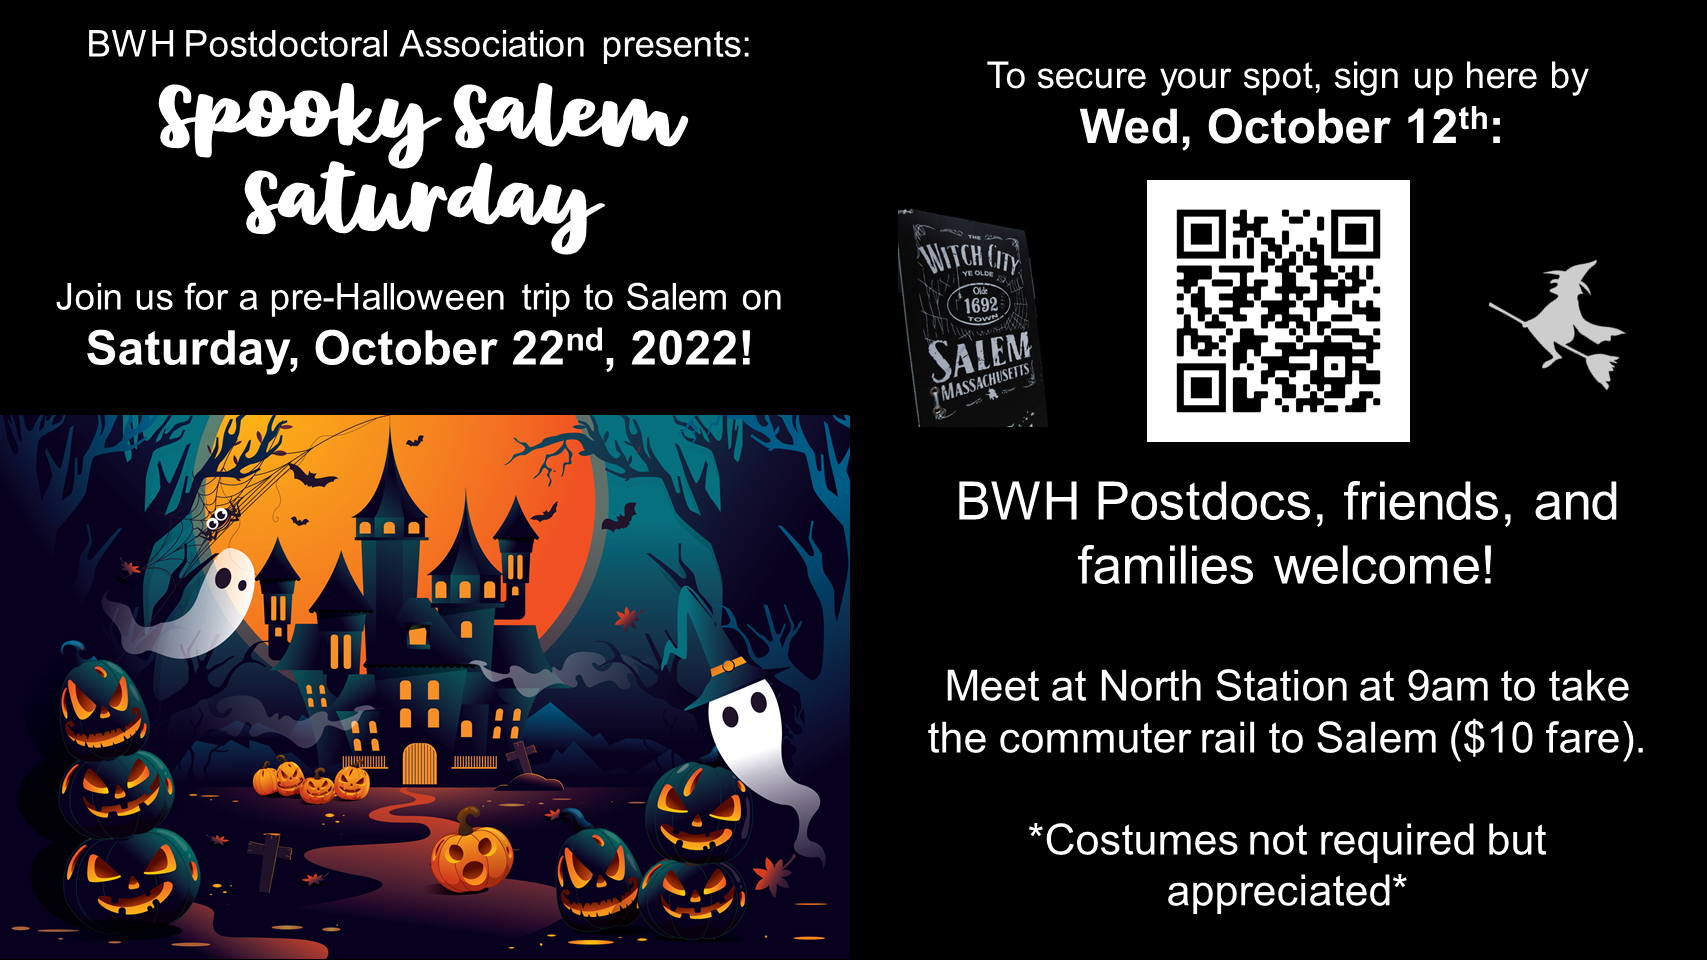 Flyer for the BWH PDA Spooky Salem Saturday event on October 22, 2022.